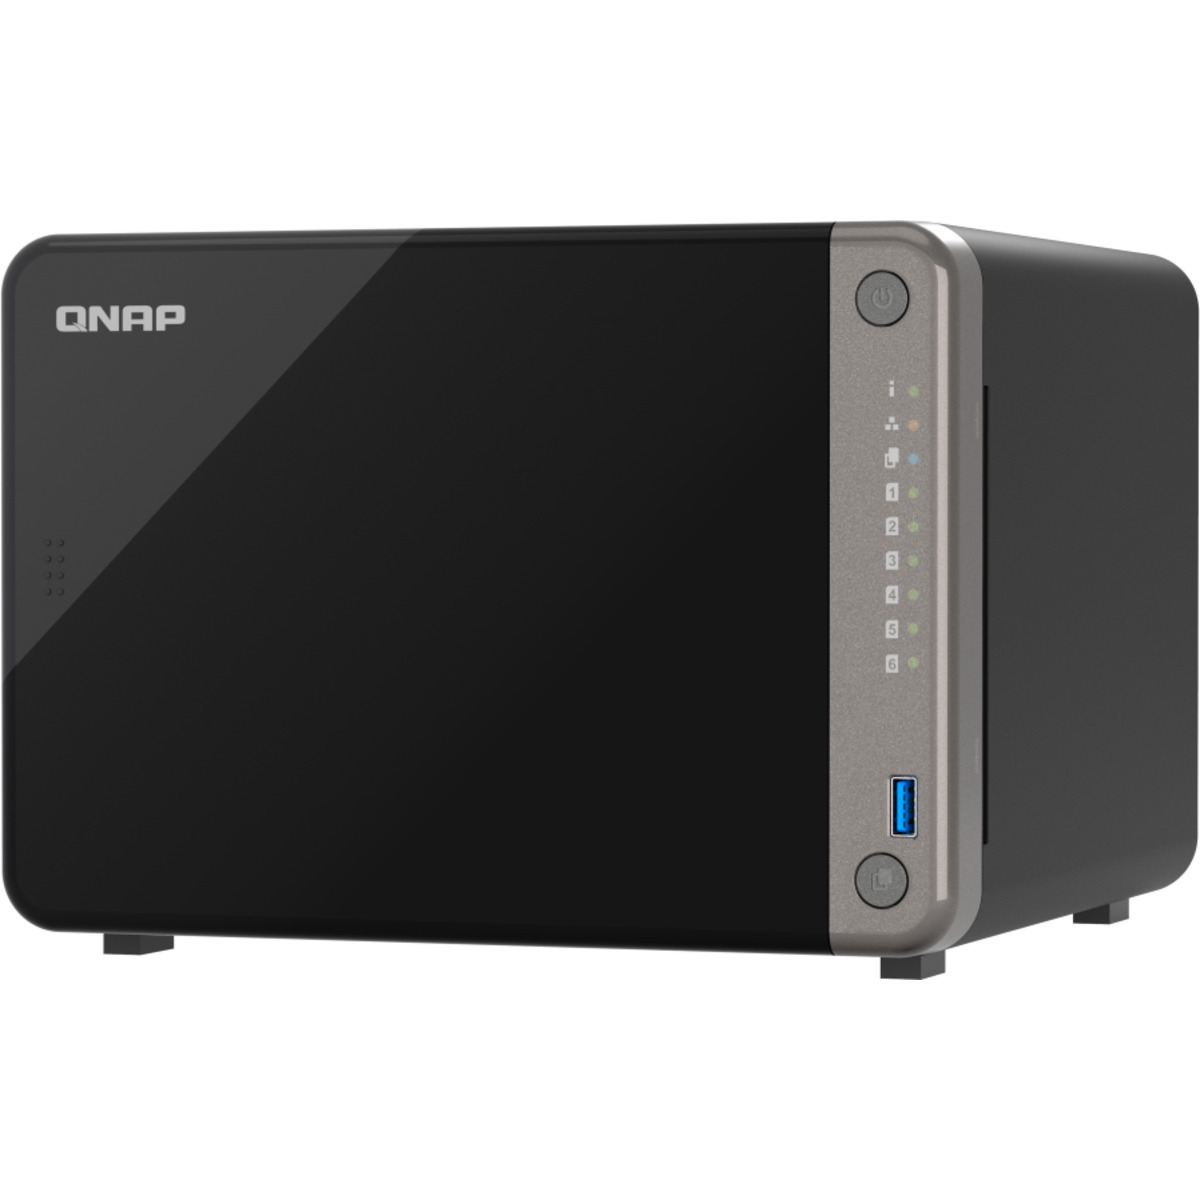 QNAP TS-AI642 10tb 6-Bay Desktop Multimedia / Power User / Business NAS - Network Attached Storage Device 5x2tb Western Digital Red SA500 WDS200T1R0A 2.5 560/530MB/s SATA 6Gb/s SSD NAS Class Drives Installed - Burn-In Tested TS-AI642